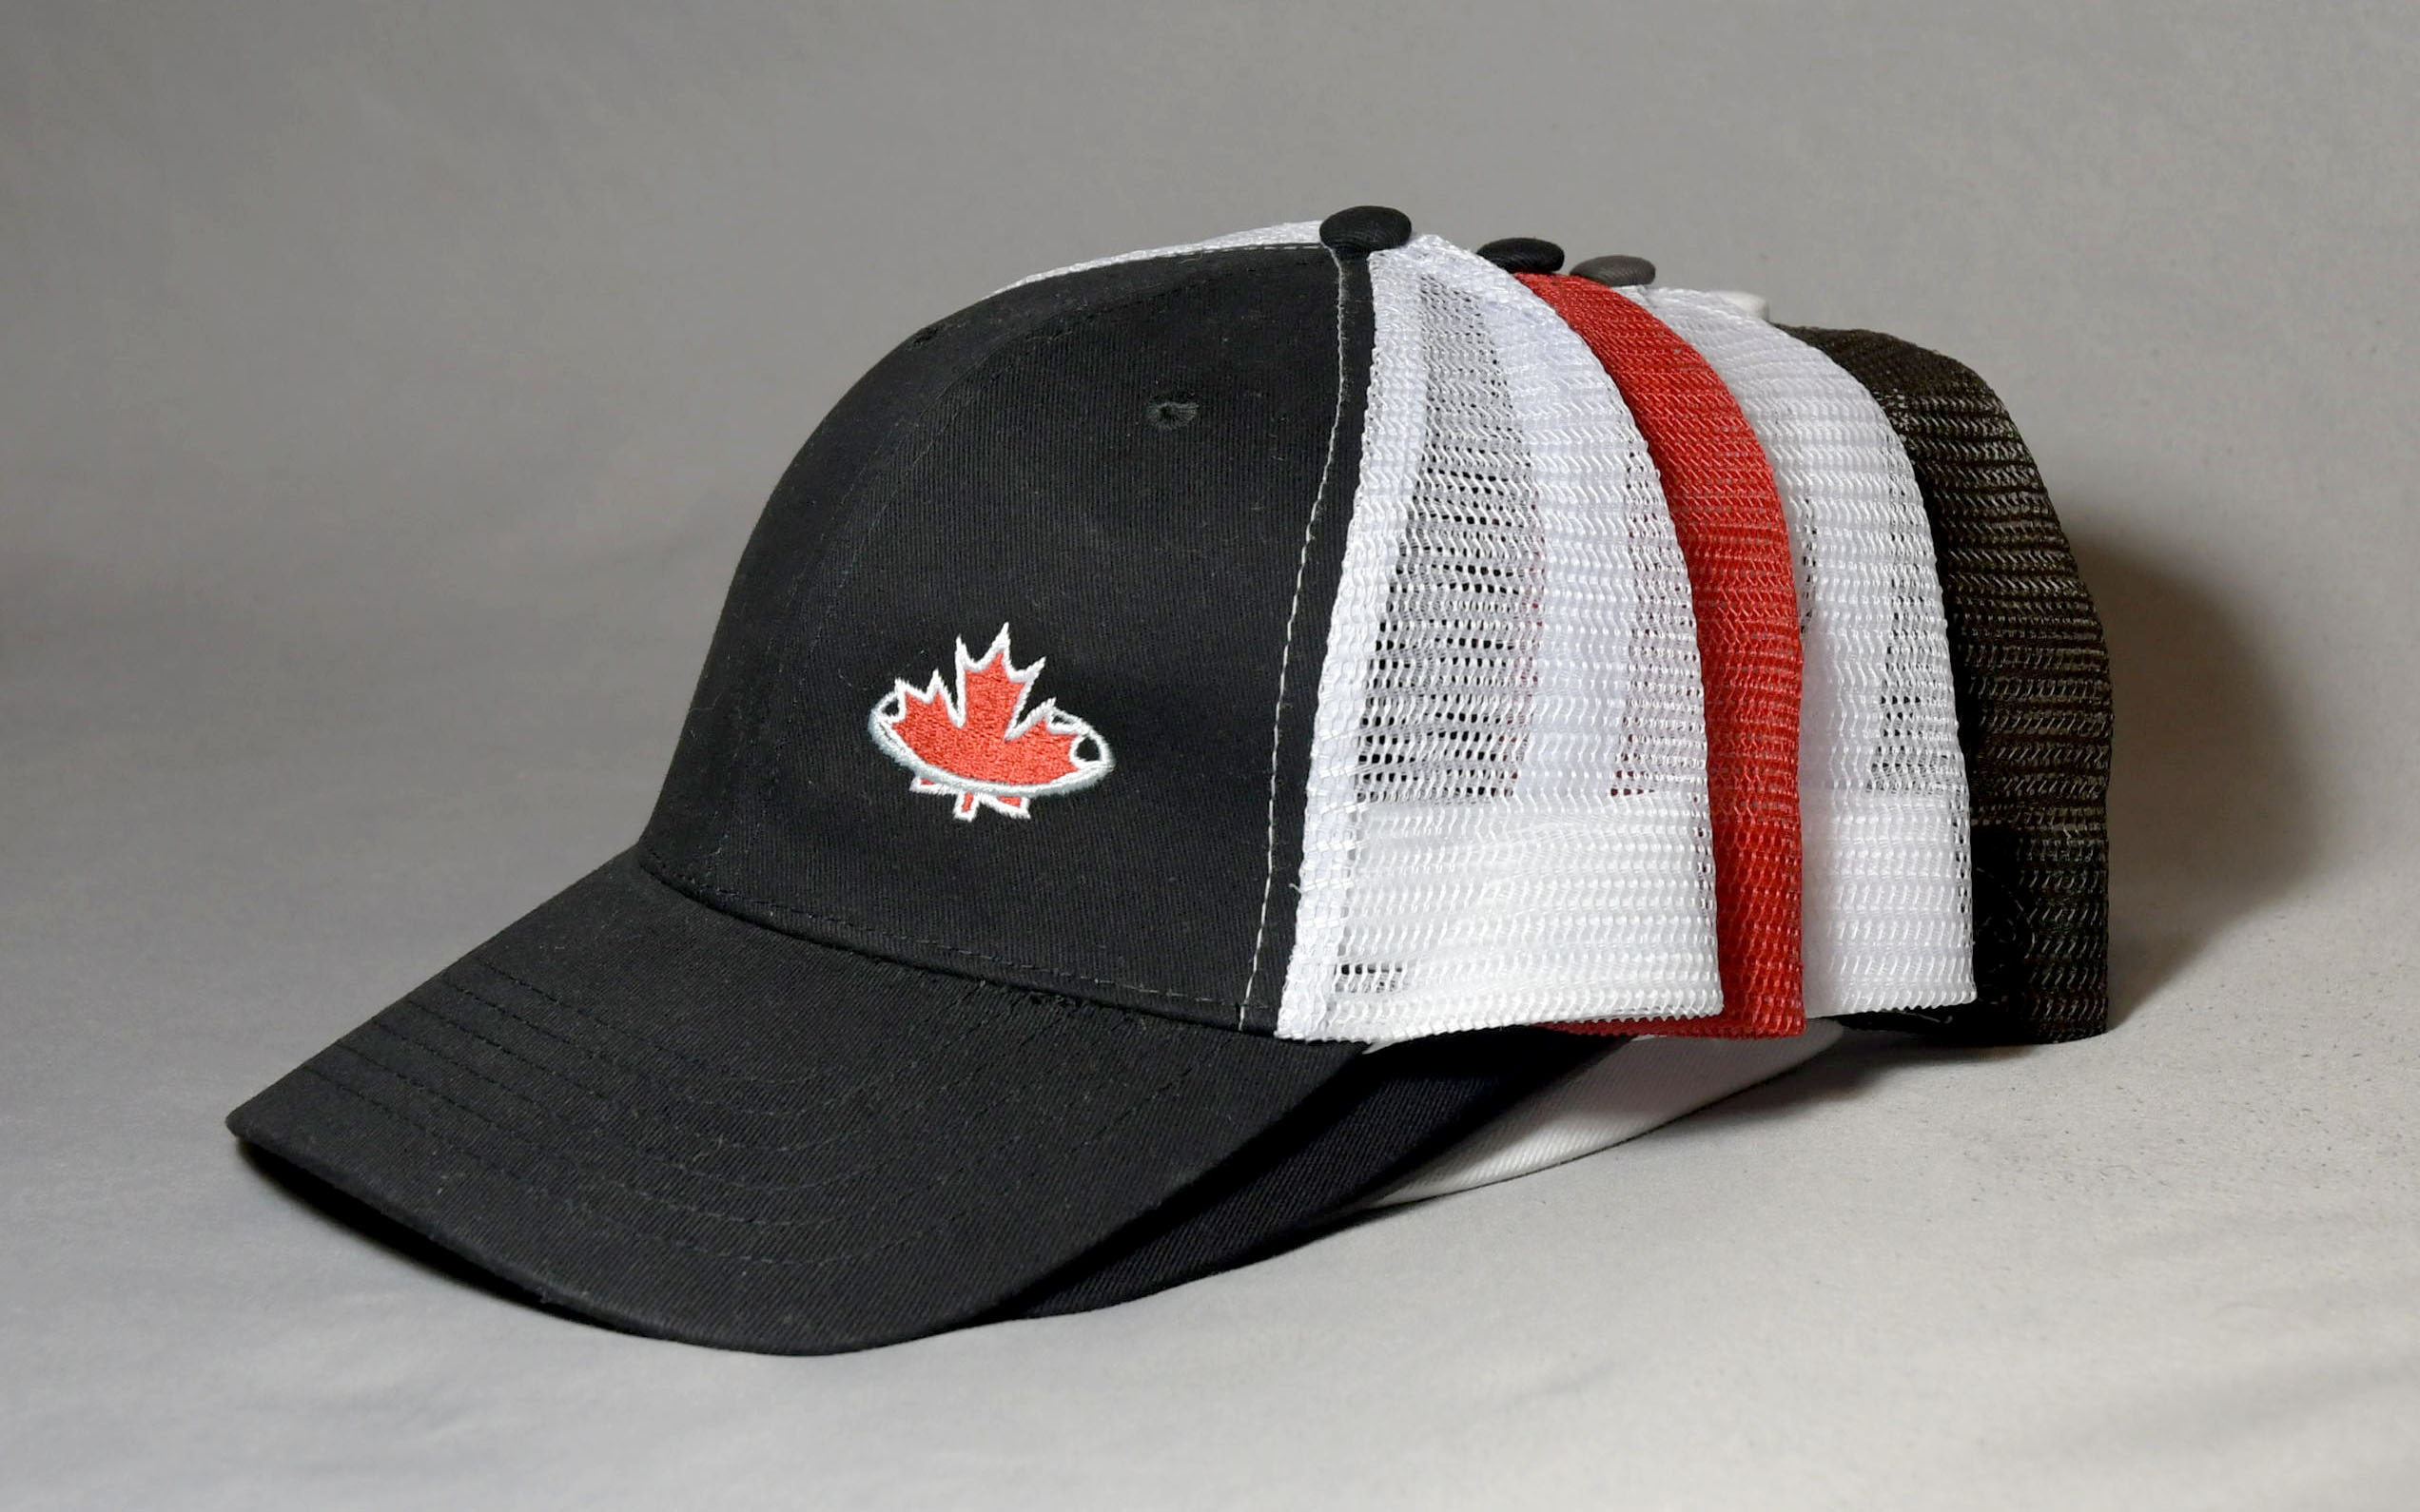 Black, white, red and brown trucker hats